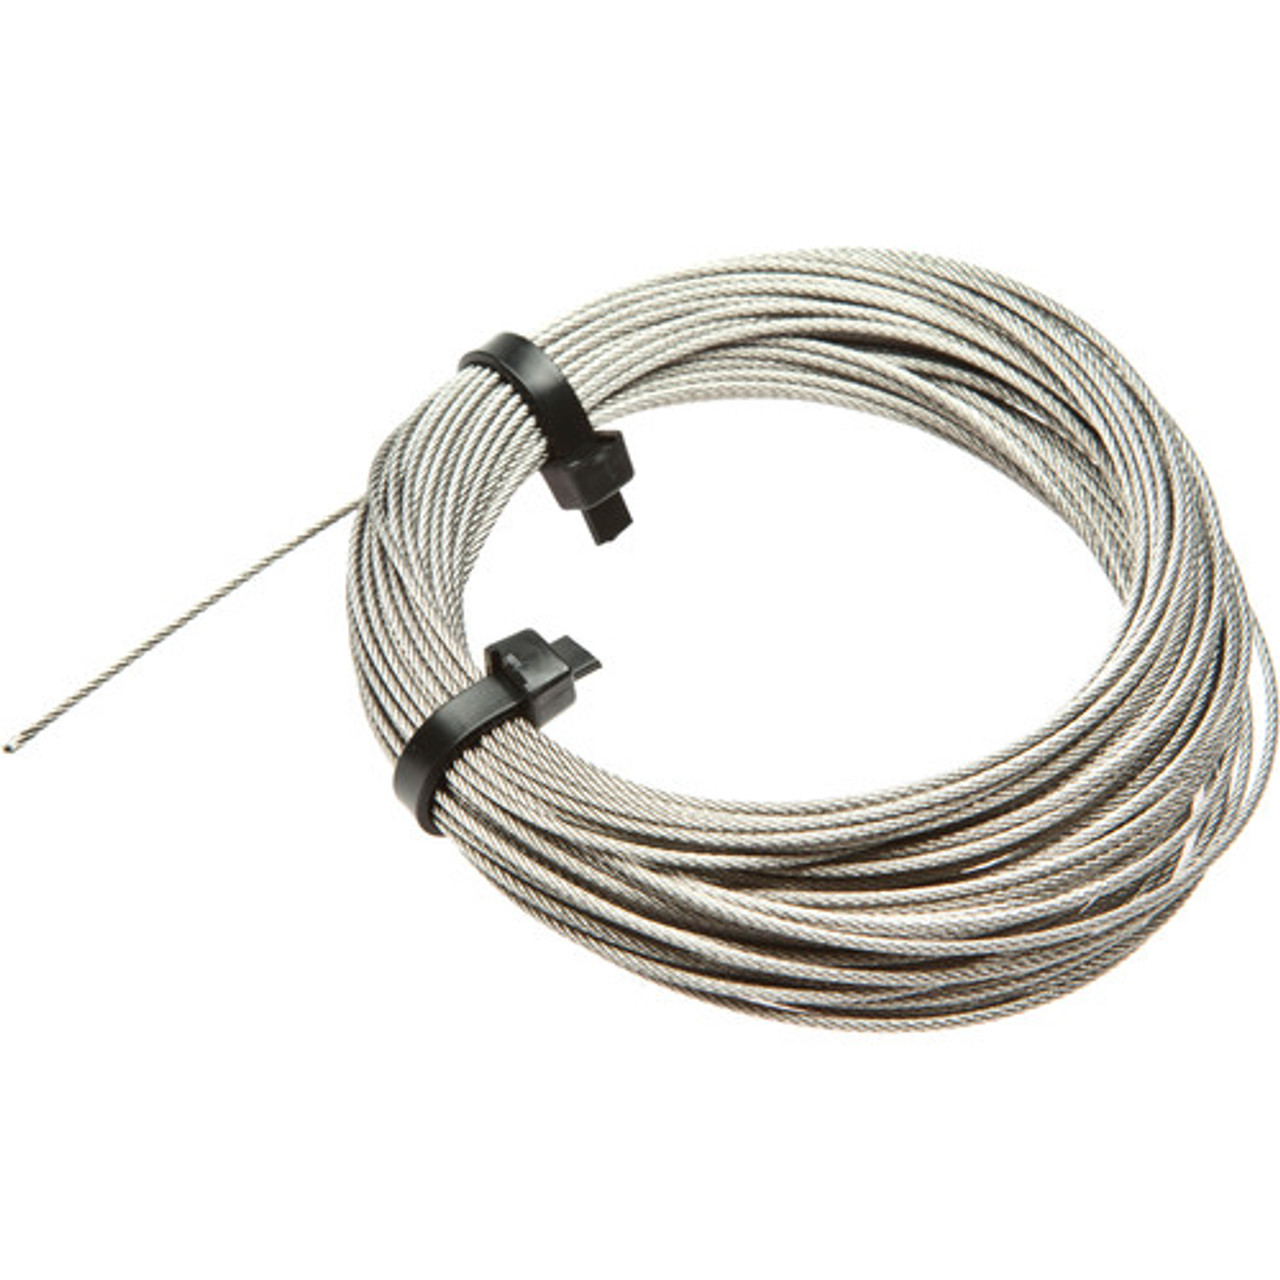 Kino Flo FreeStyle Tube Mount Hanging Wire 50' (MTP-F103W)